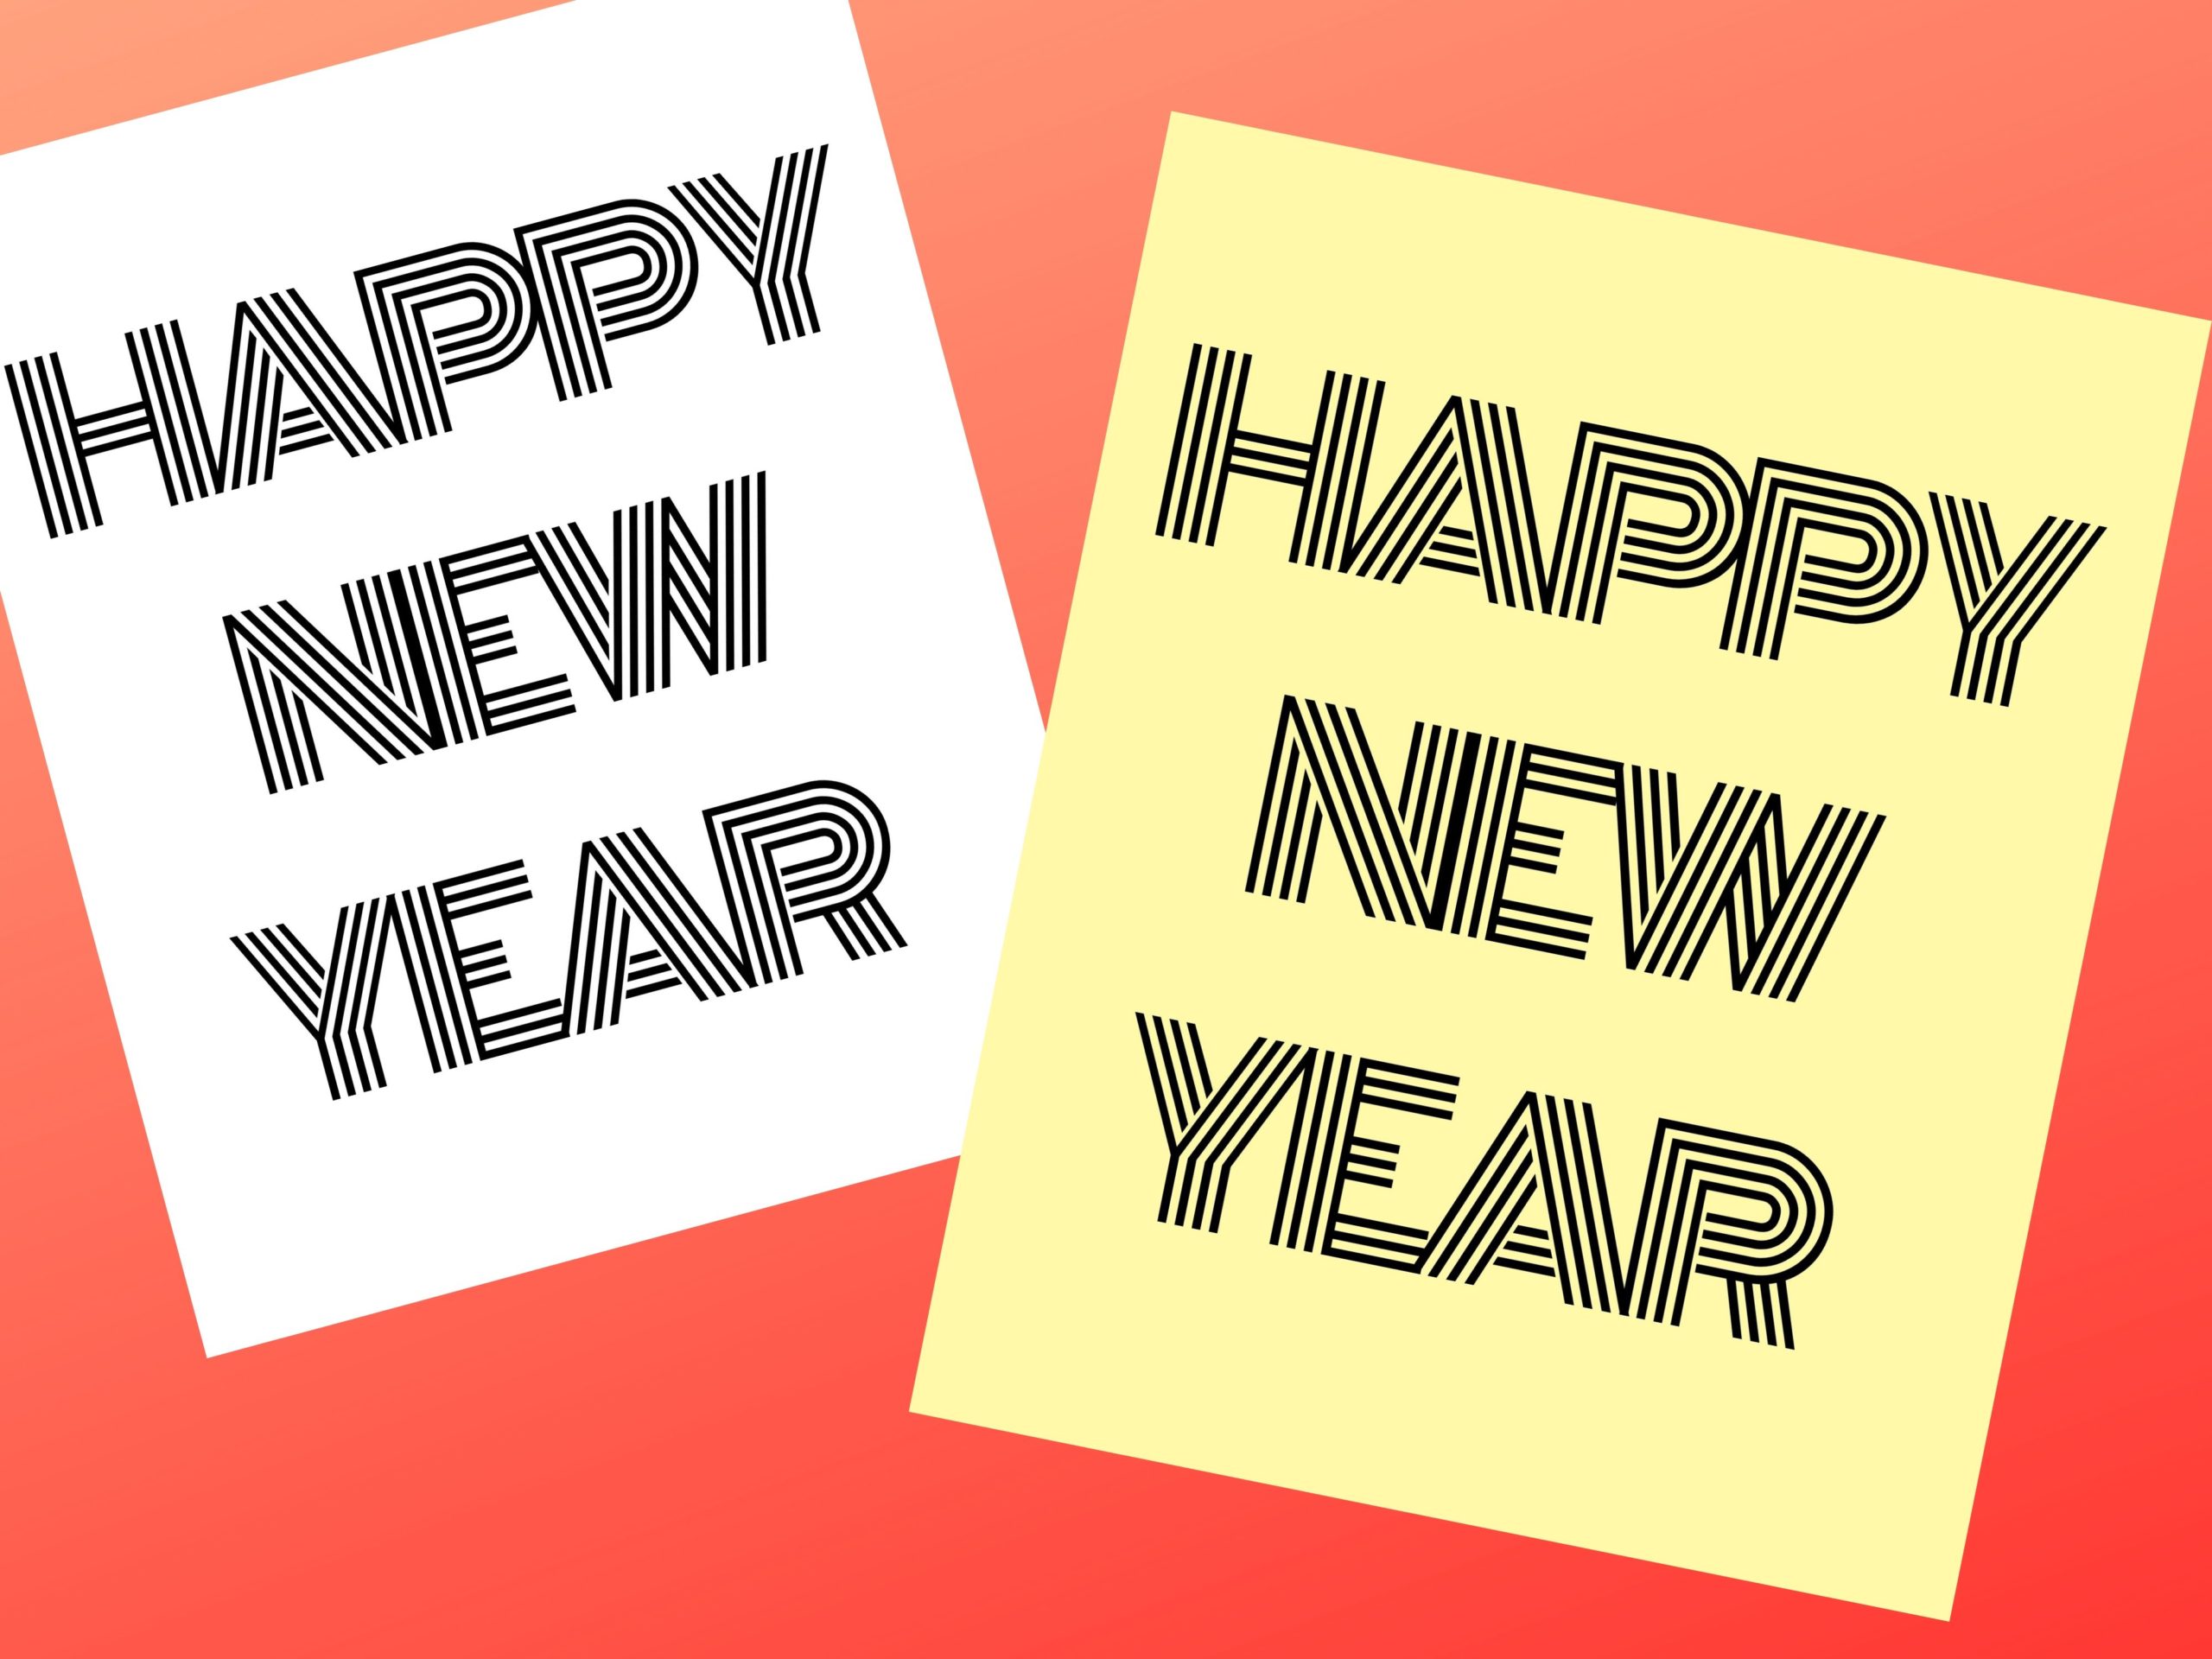 Two 8" x 10" decorations (one with a white background and one with a yellow background) with black lettering saying "Happy New Year".